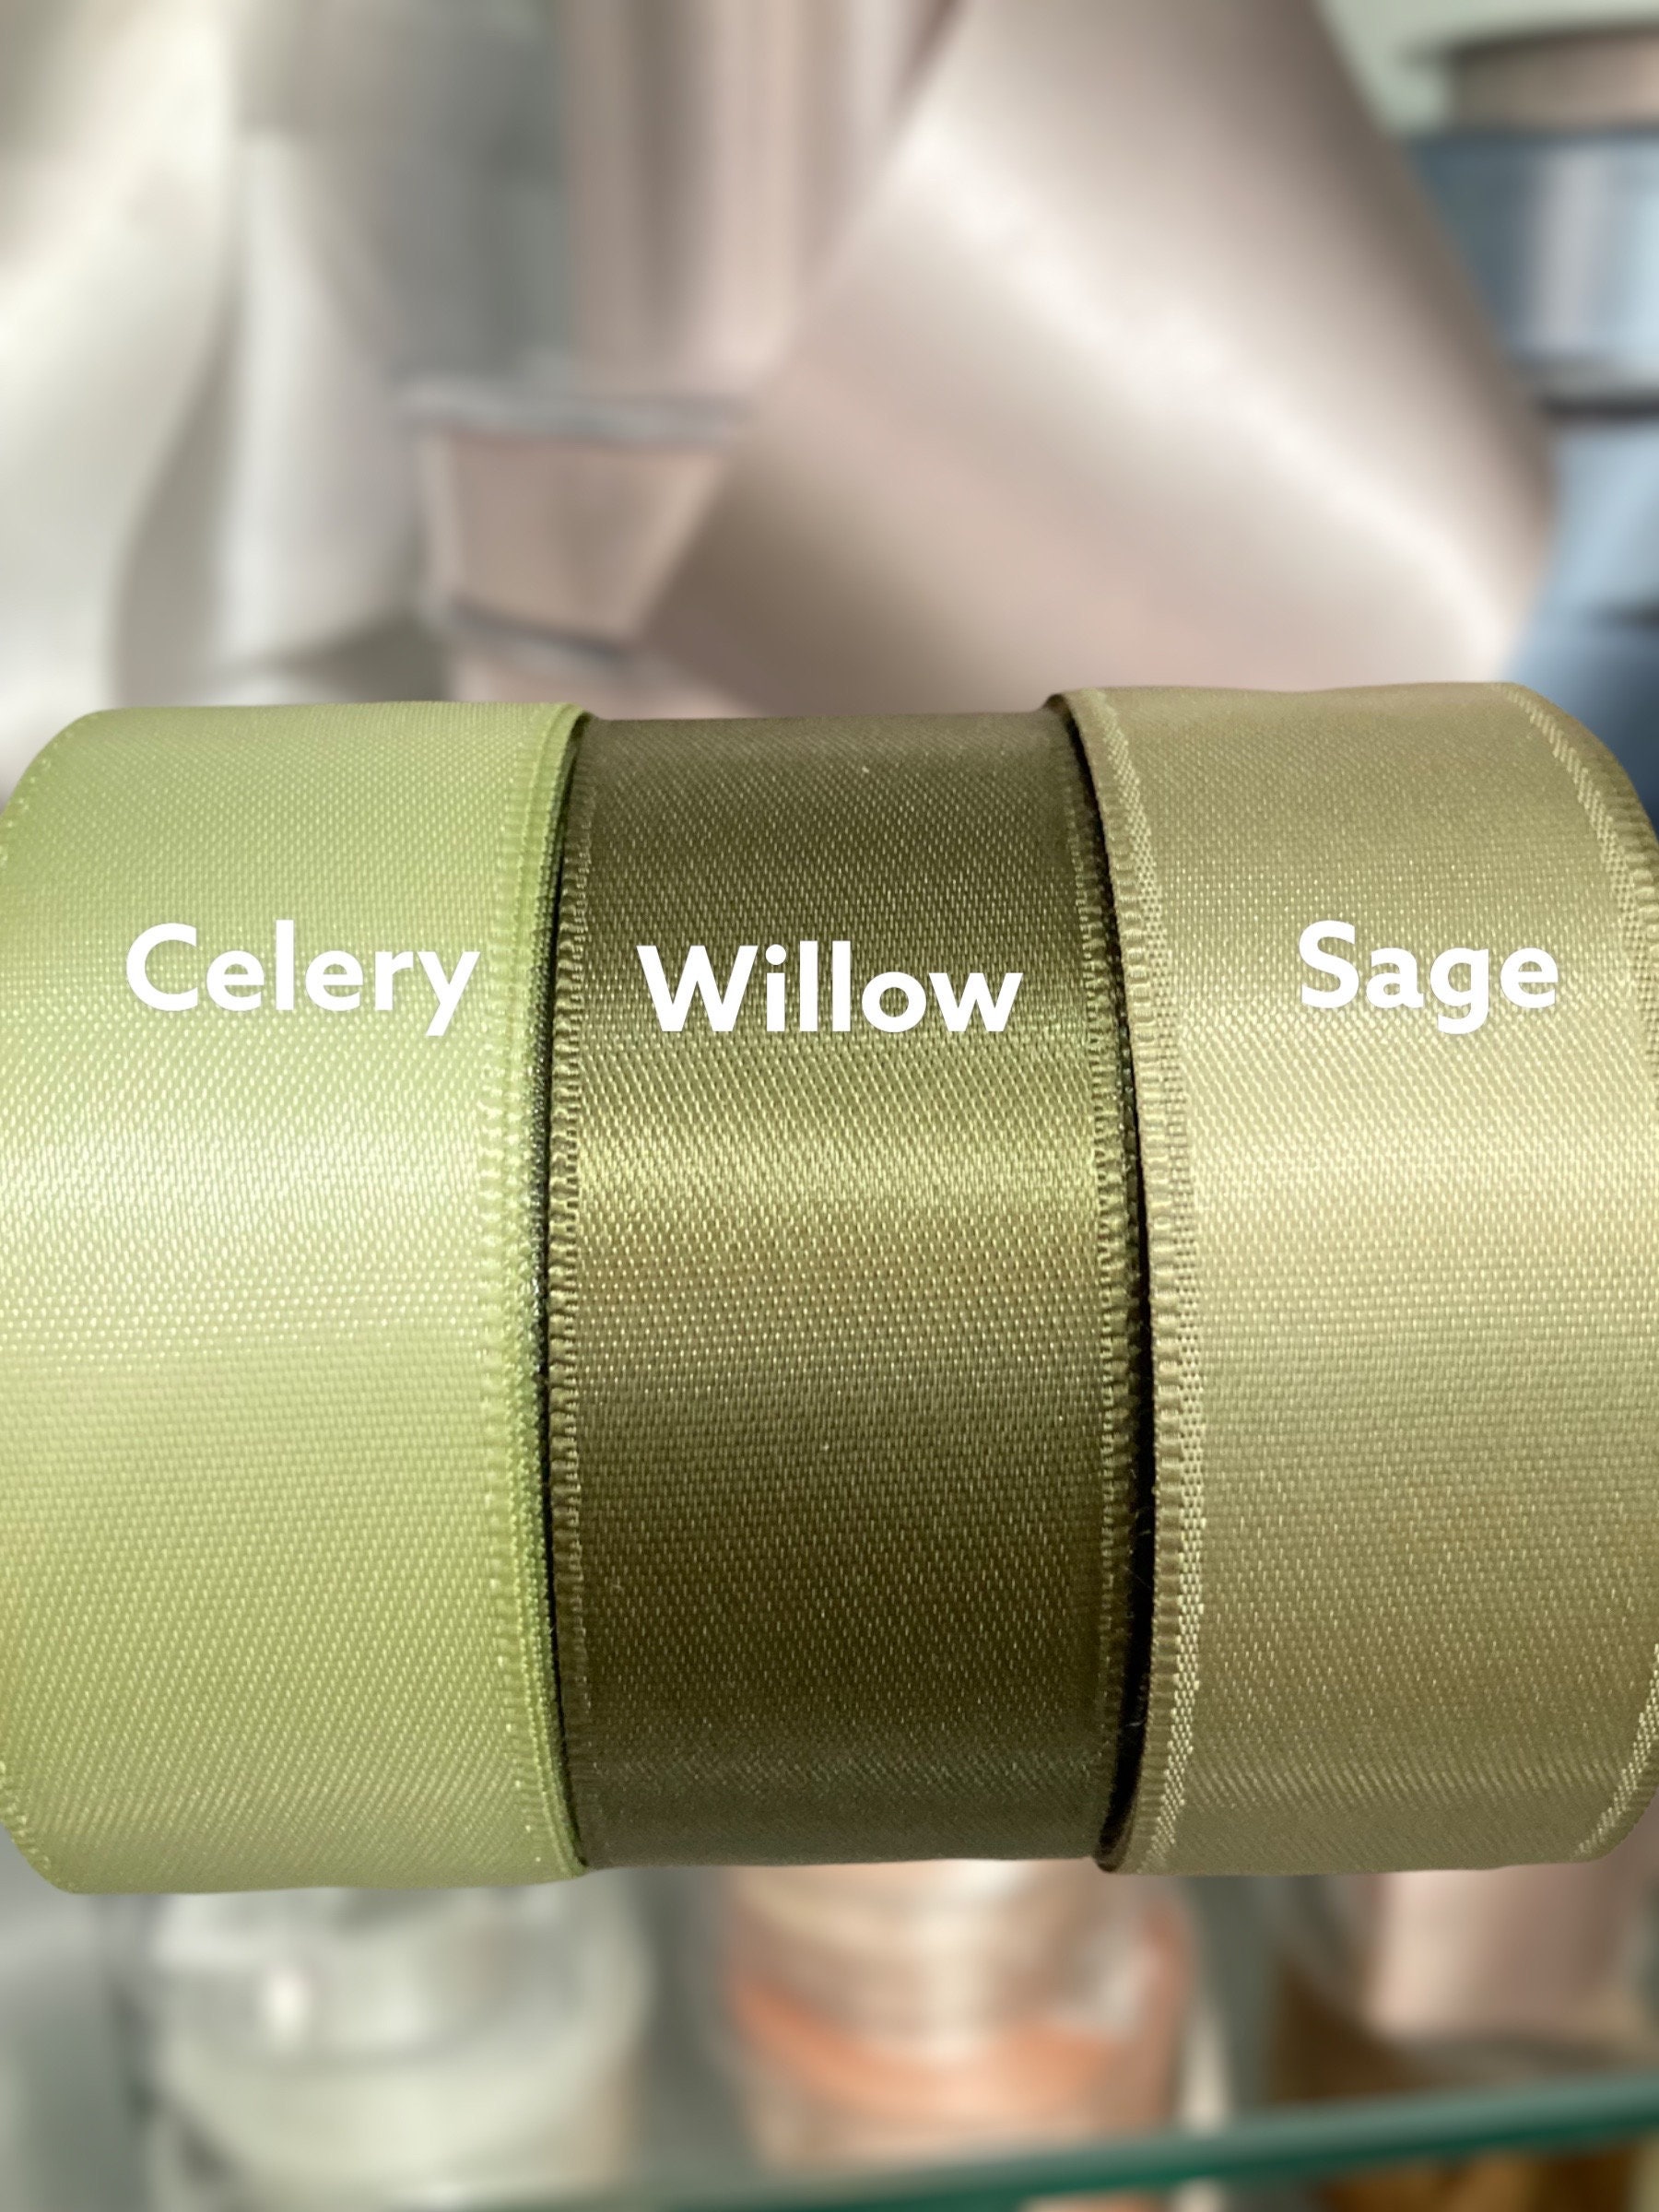  MEEDEE Sage Satin Ribbon 1-1/2 Inch Light Green Ribbon Lux  Satin Double Faced Satin Ribbon by 50 Yards Green Polyester Satin Ribbon  for Crafts, Satin Weddings, Flower Bouquet, Holiday Decorating